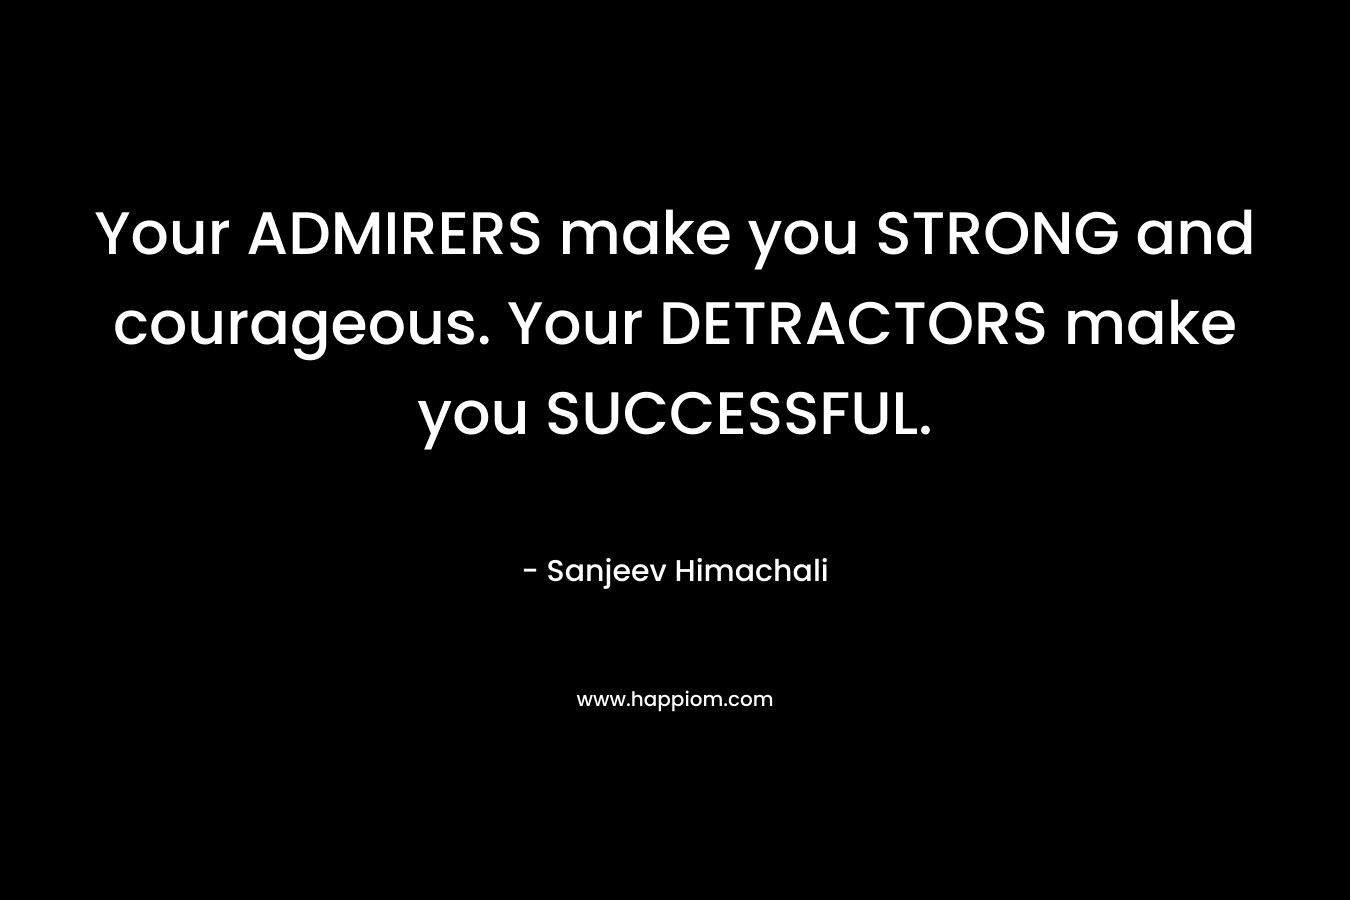 Your ADMIRERS make you STRONG and courageous. Your DETRACTORS make you SUCCESSFUL.